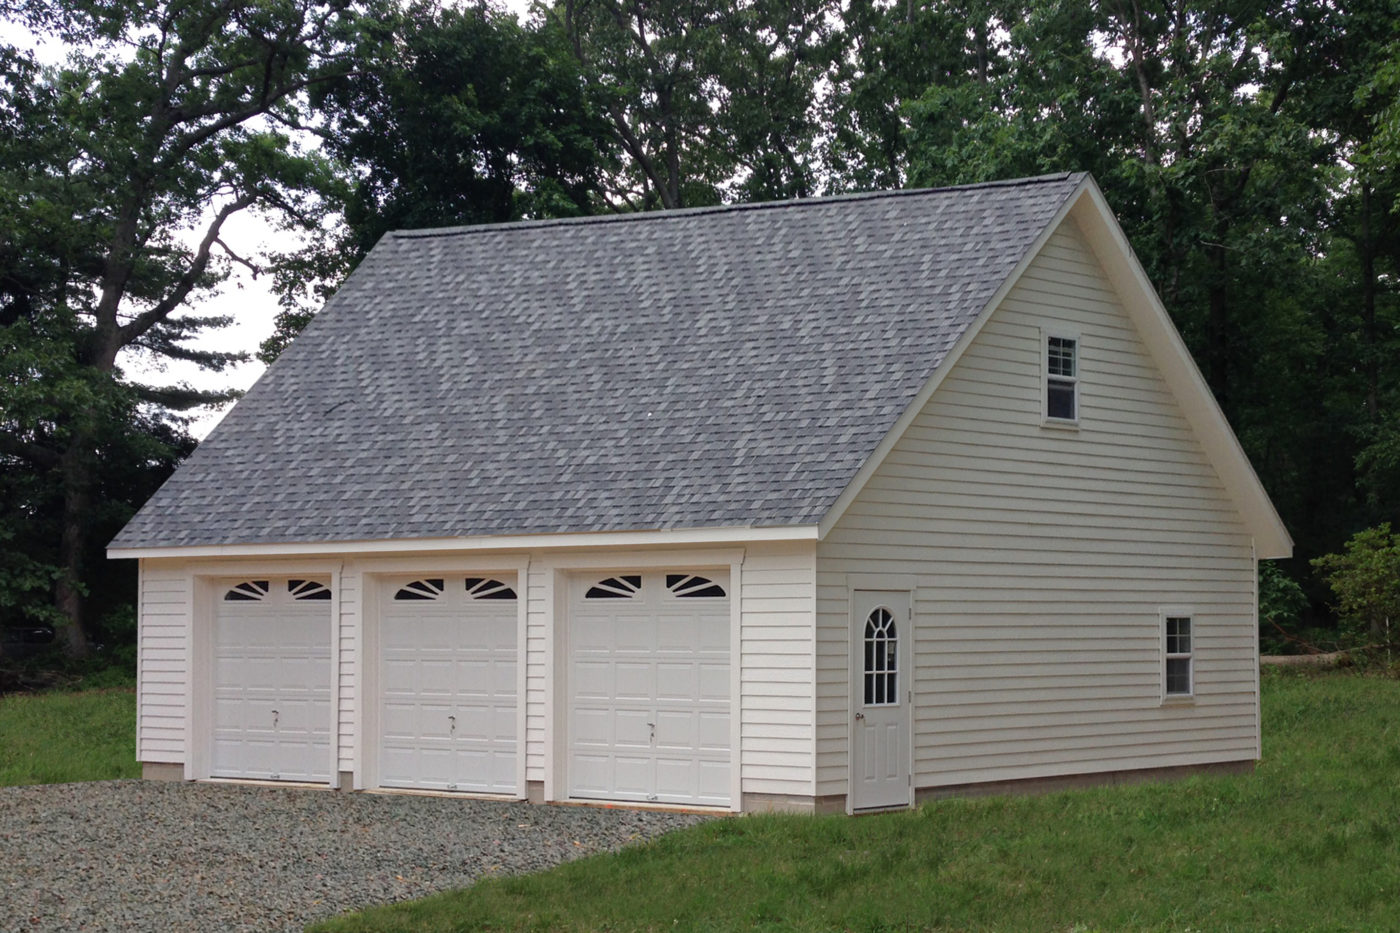 How Much Does A Detached Garage Cost, Cost Per Square Foot To Build A Detached Garage